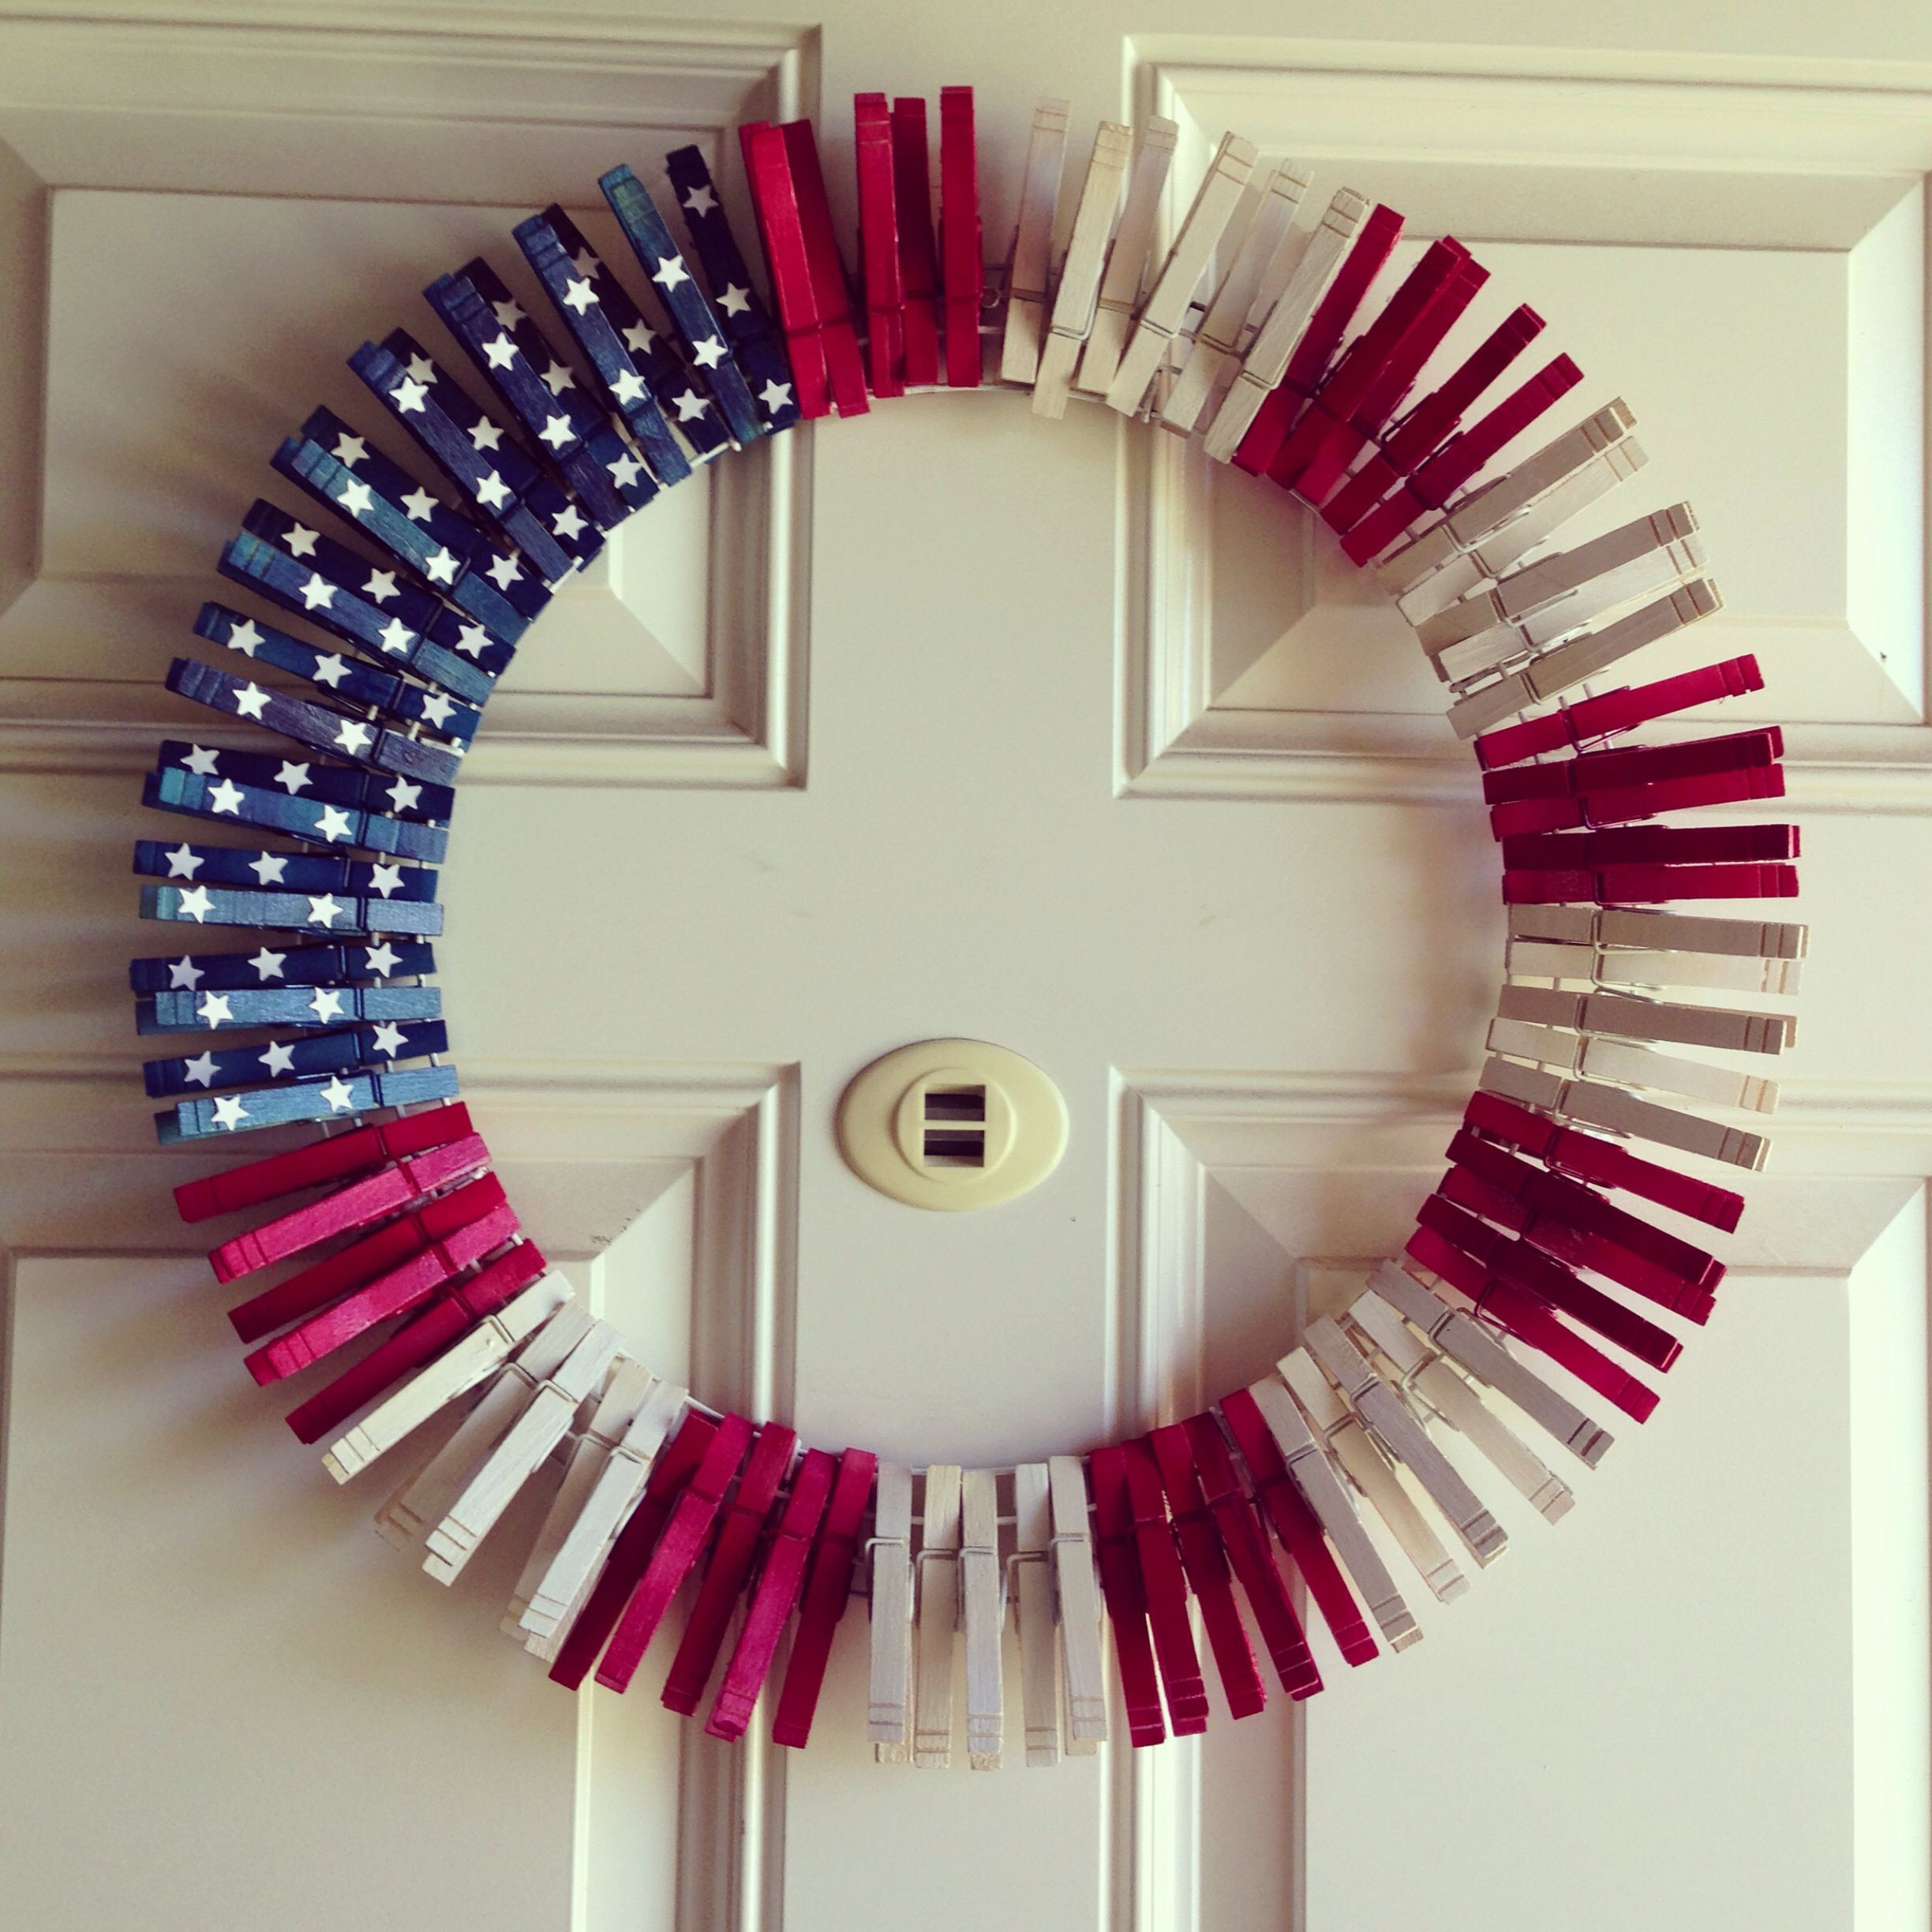 Pinterest 4th Of July Crafts
 Fourth of July Wreath crafts